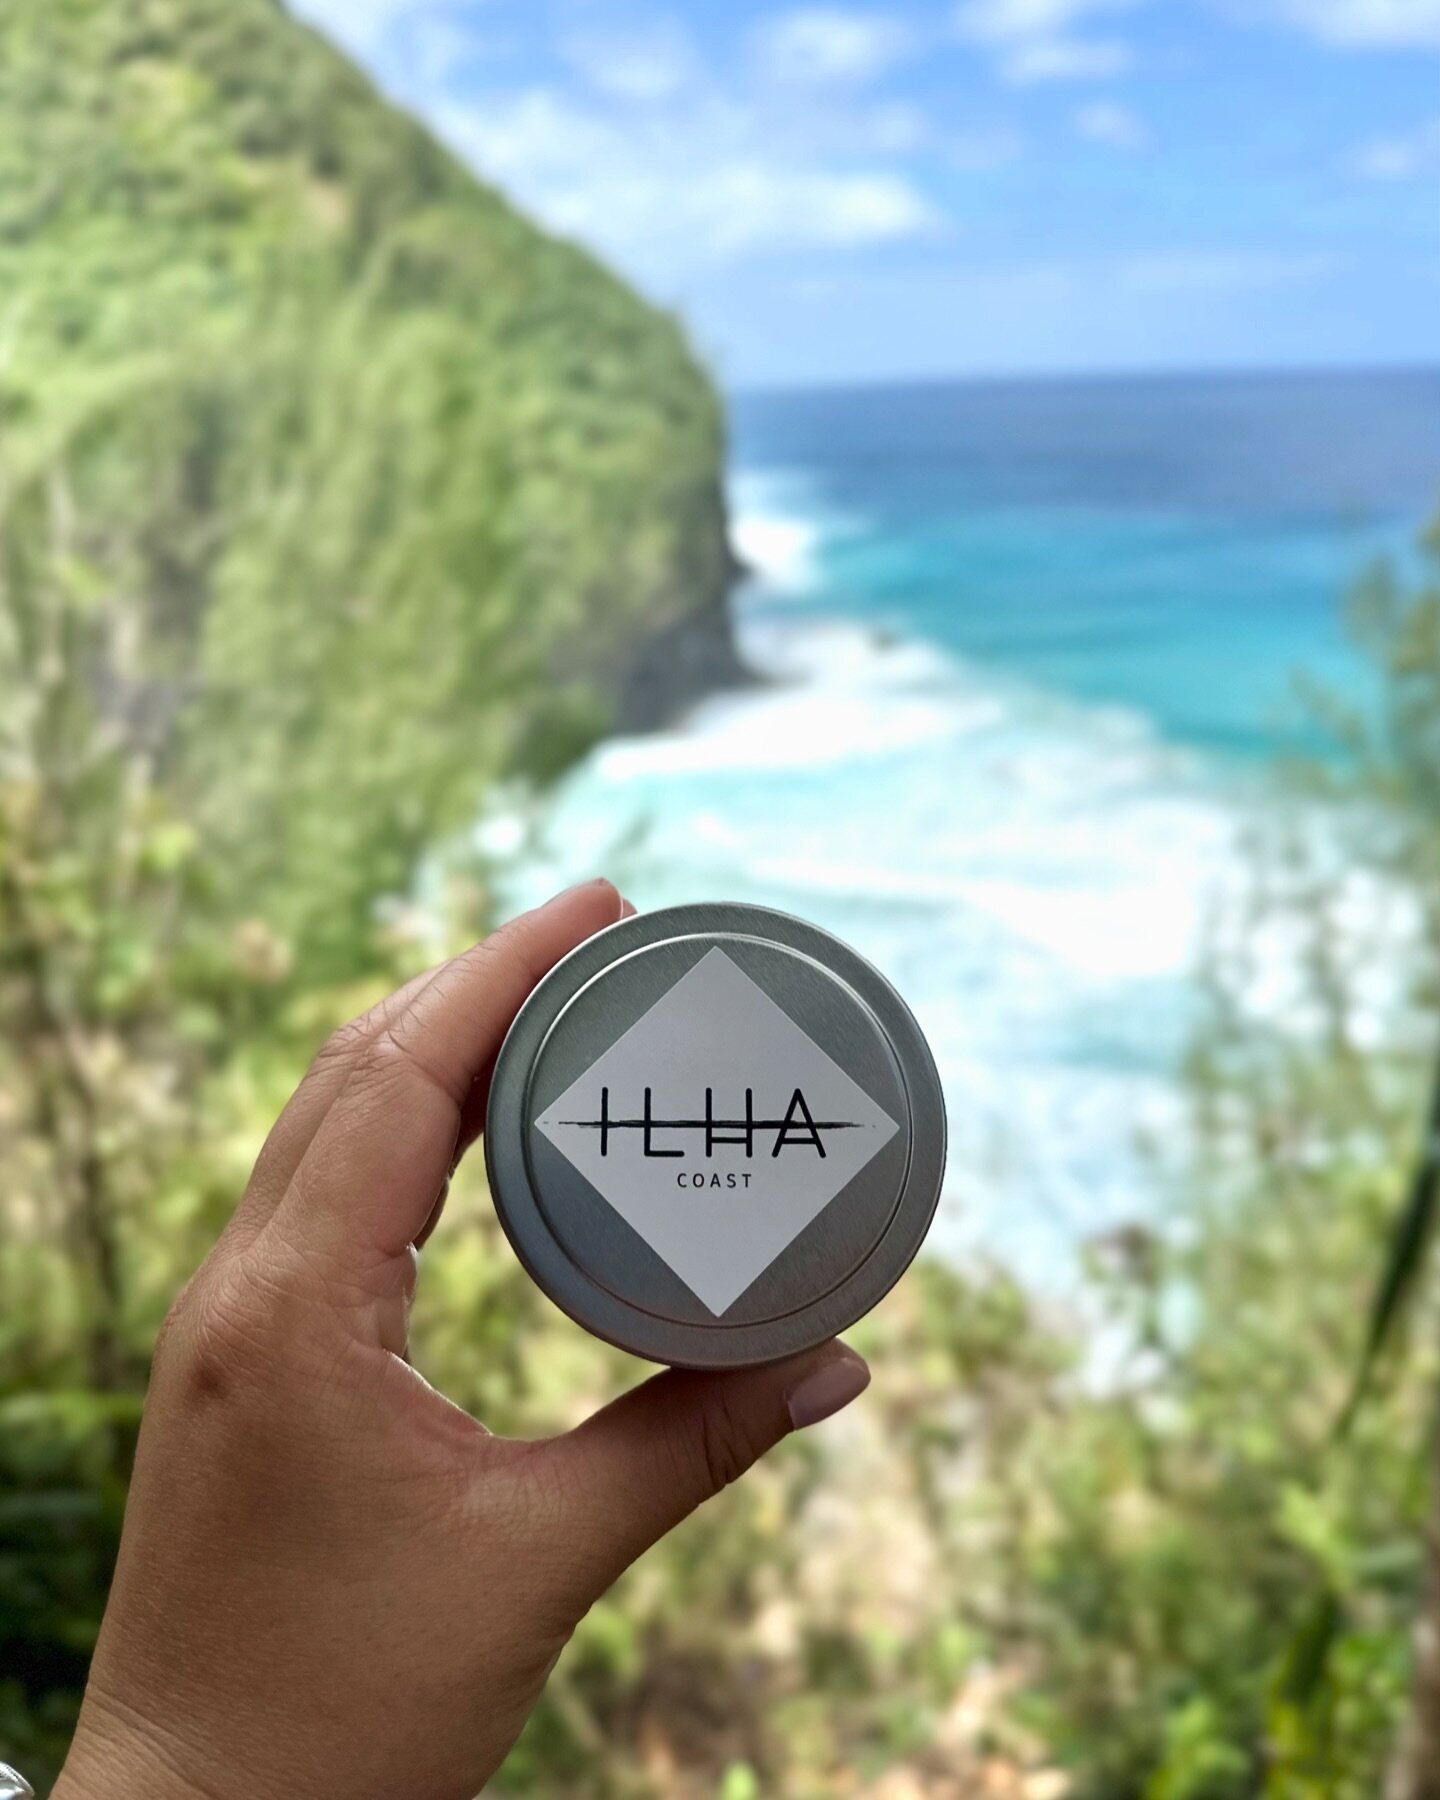 COAST has been a big hit with you all! It&rsquo;s fresh and invigorating with notes of melon, jasmine, and sandalwood. It was the perfect companion as we hiked the coast of Kauai last week. 😎 

All outstanding orders have been shipped. Thank you so 